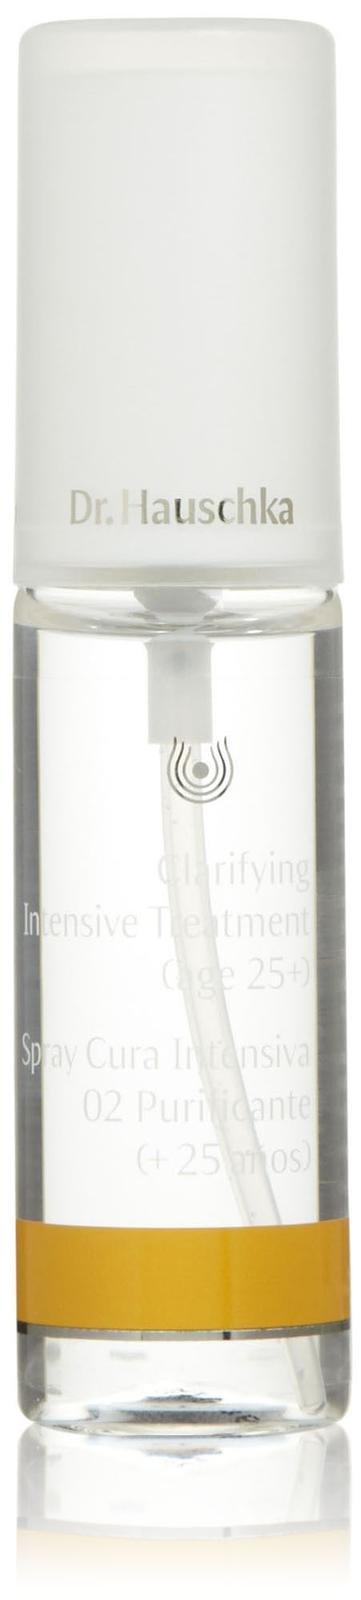 Dr. Hauschka Skin Care Clarifying Intensive Treatment (age 25+)